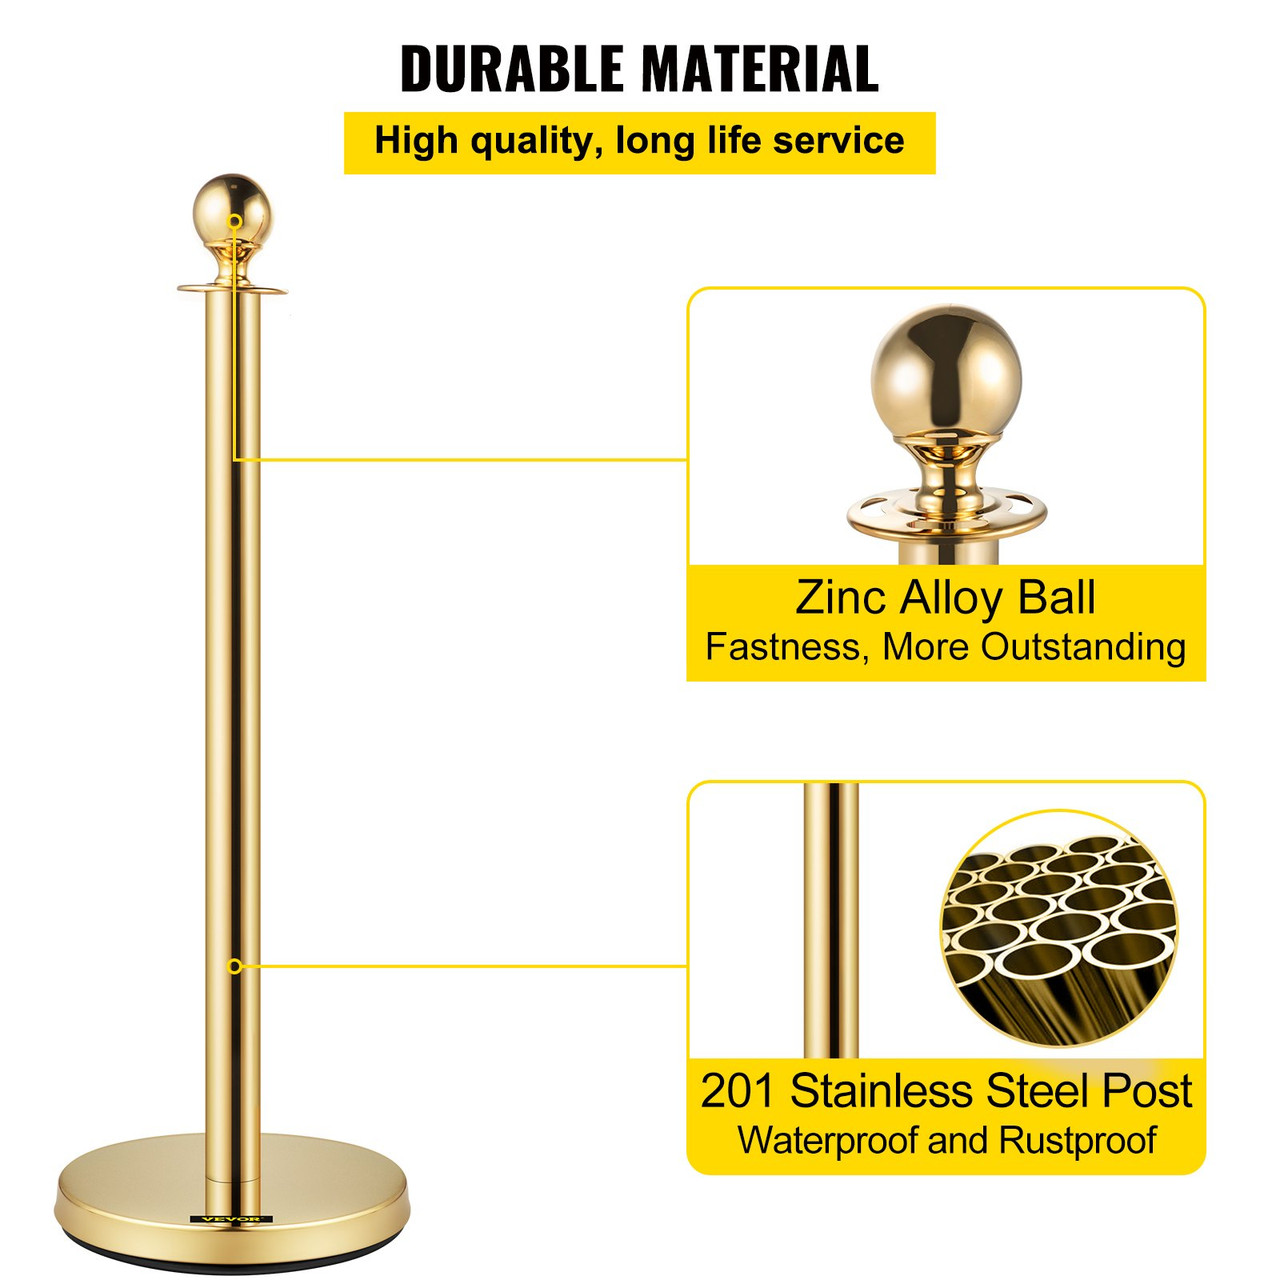 38 Inch Stanchion Posts Queue, Red Velvet Rope (3, Gold)